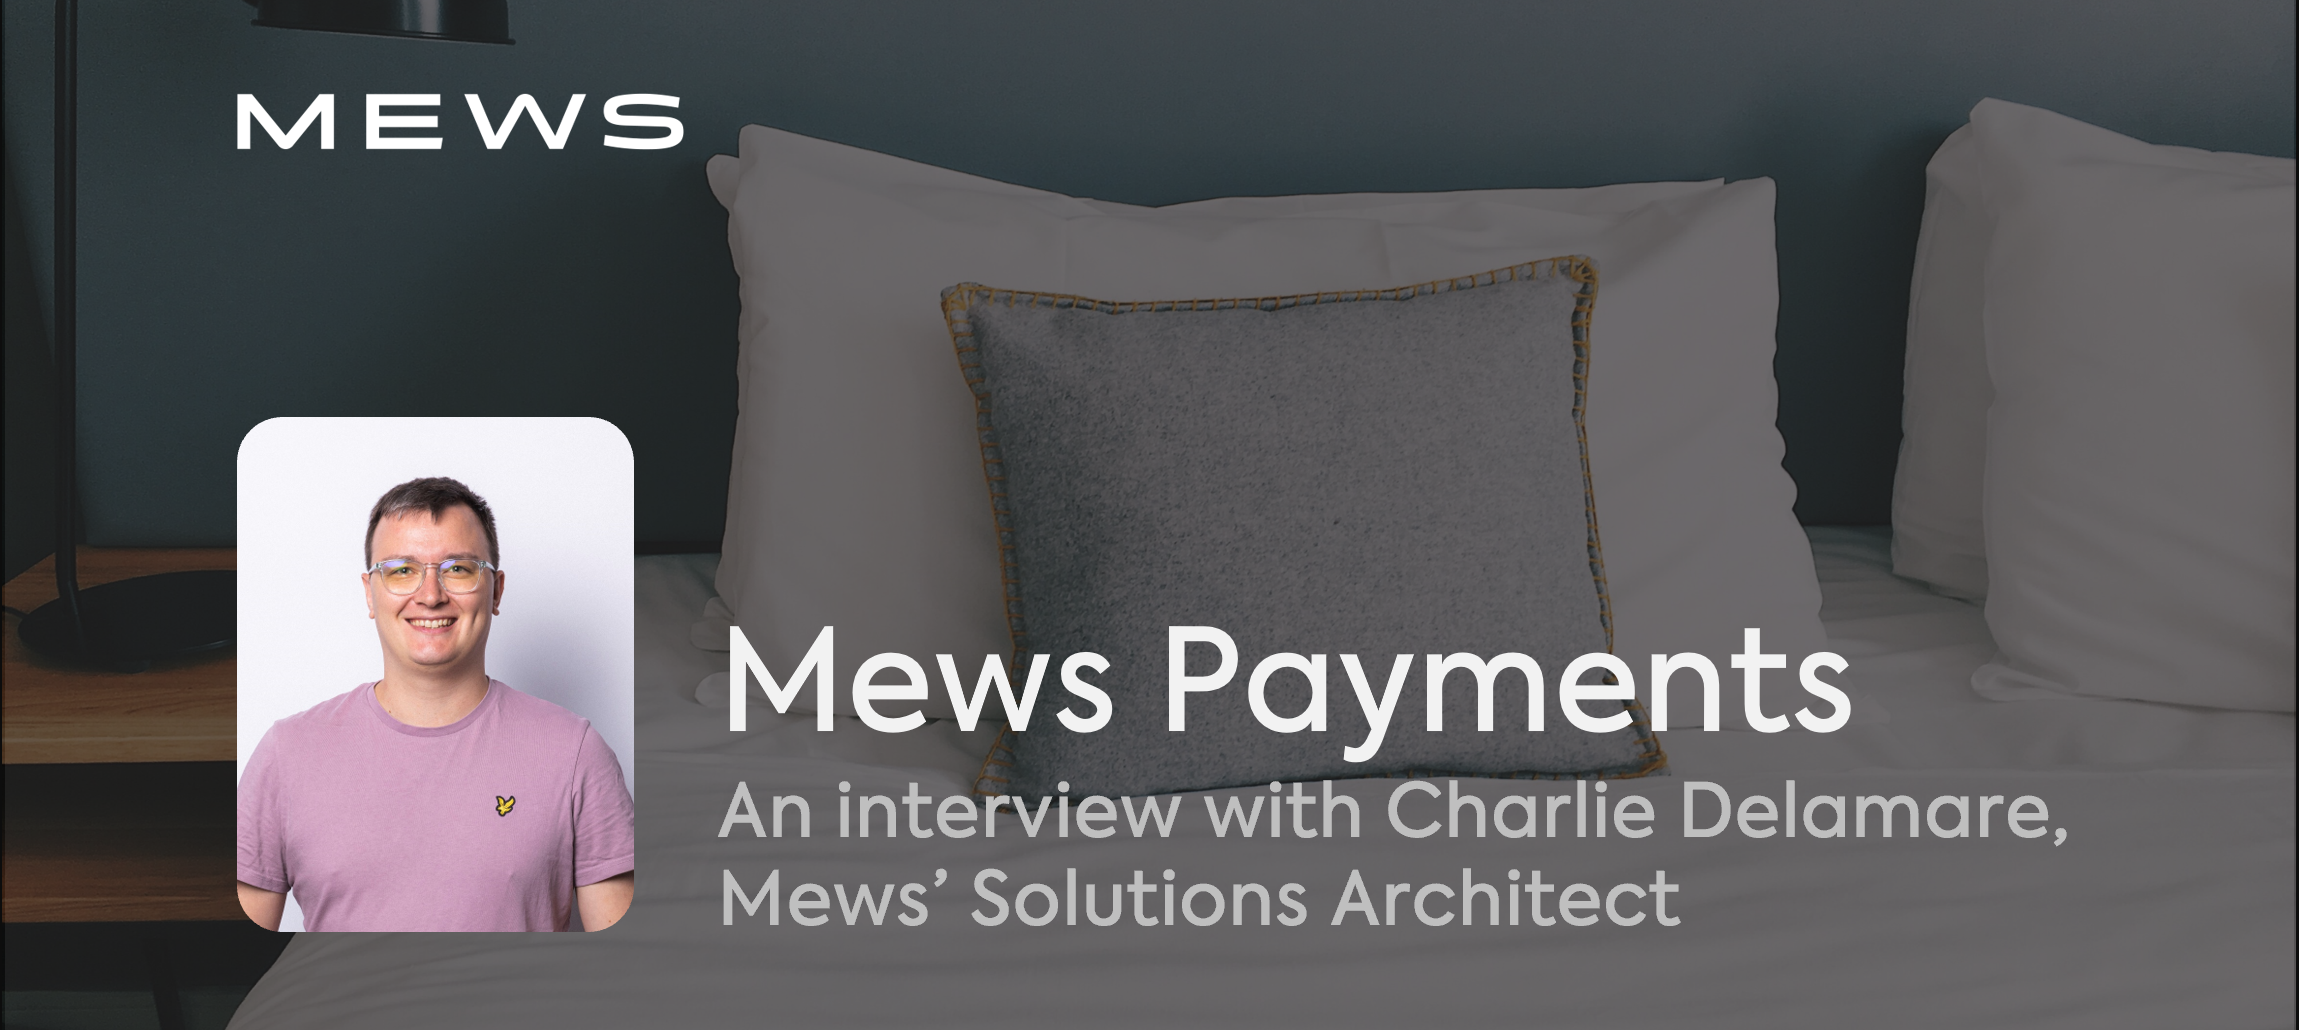 Mews payments: an interview with Charlie Delamare, Mews' Solutions Architect